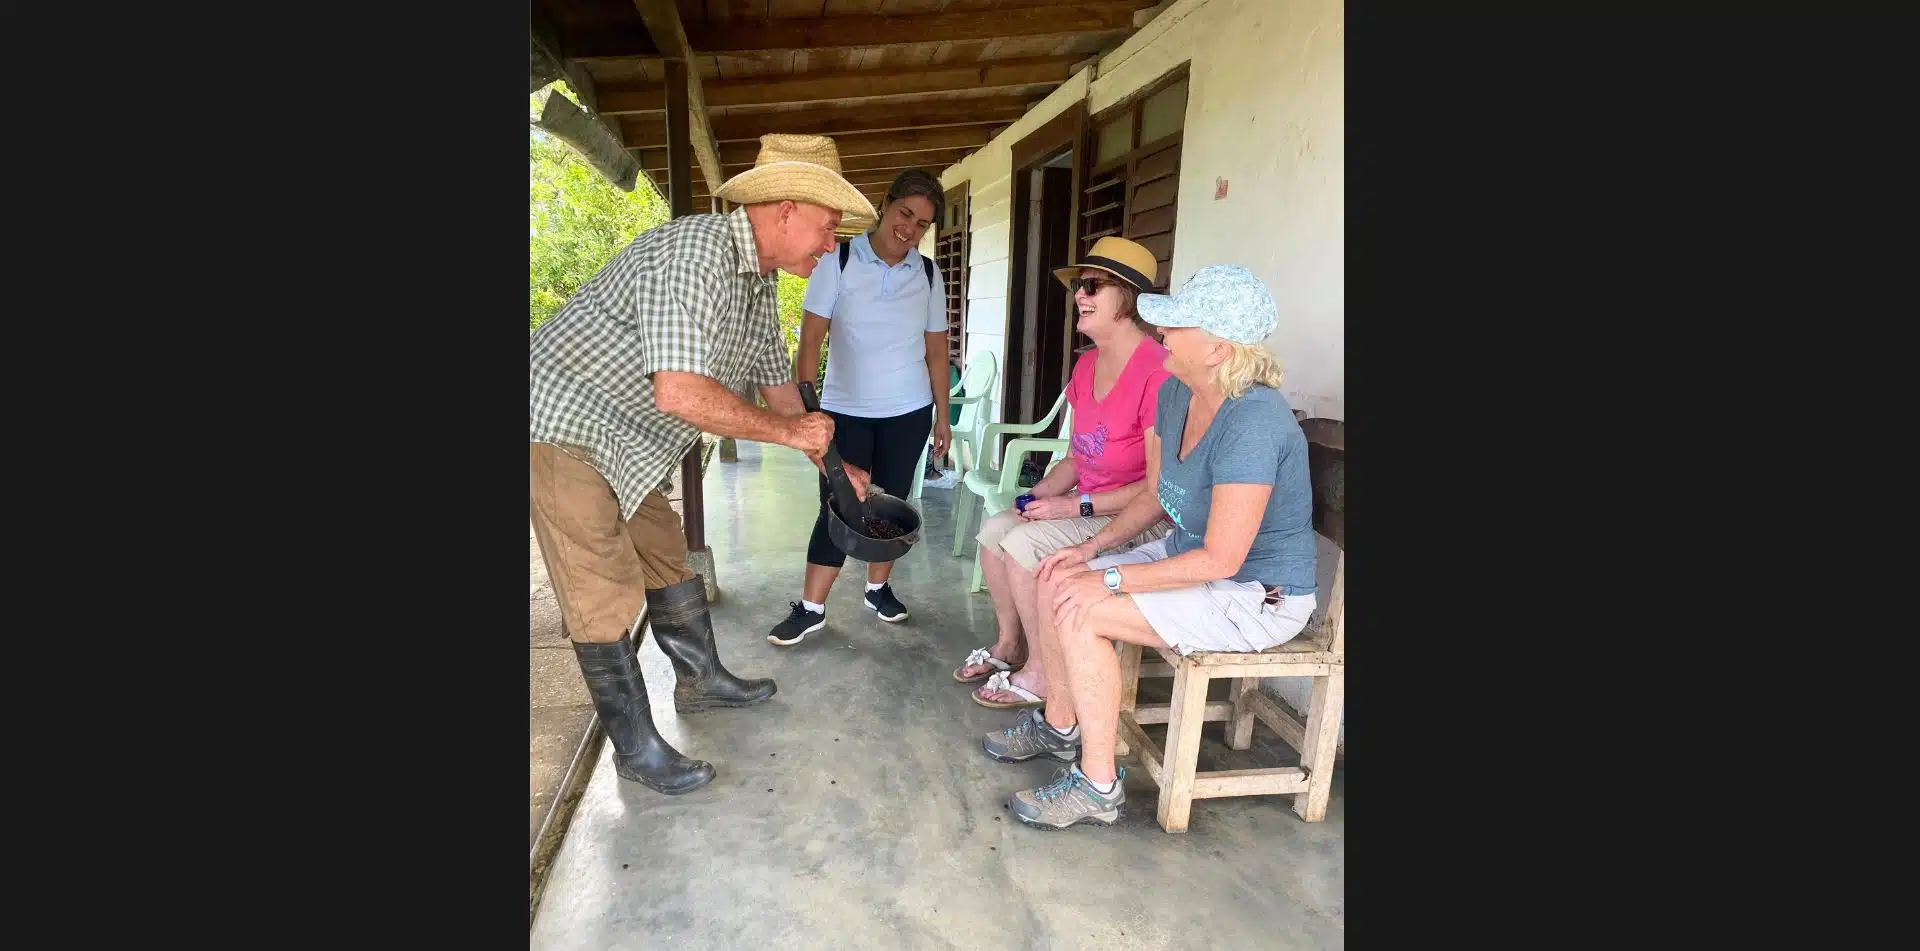 Meet a family of coffee growers who welcome you to their plantation and share a tasting with you